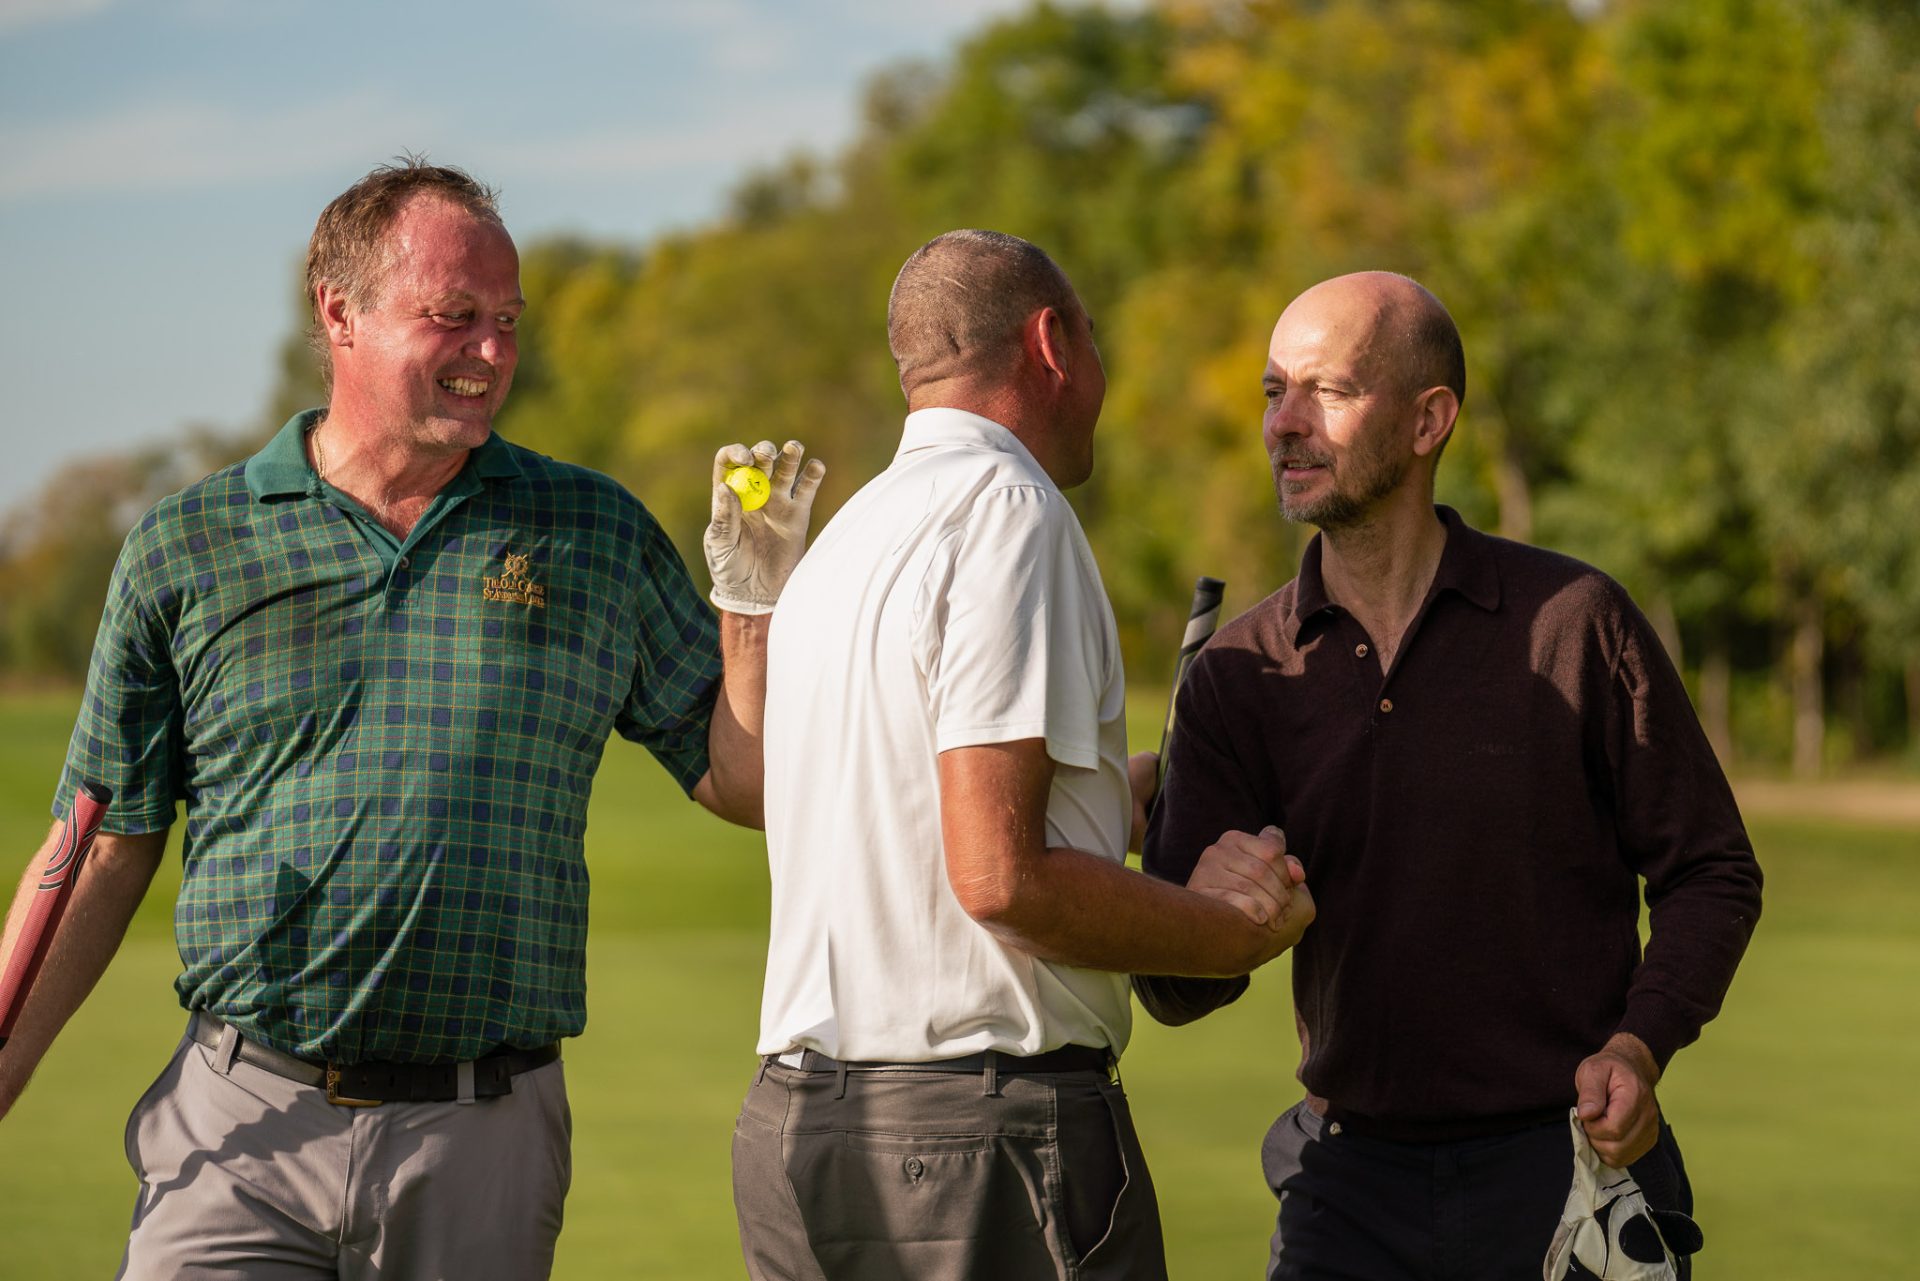 Slovanet Impact Golf Cup 2022